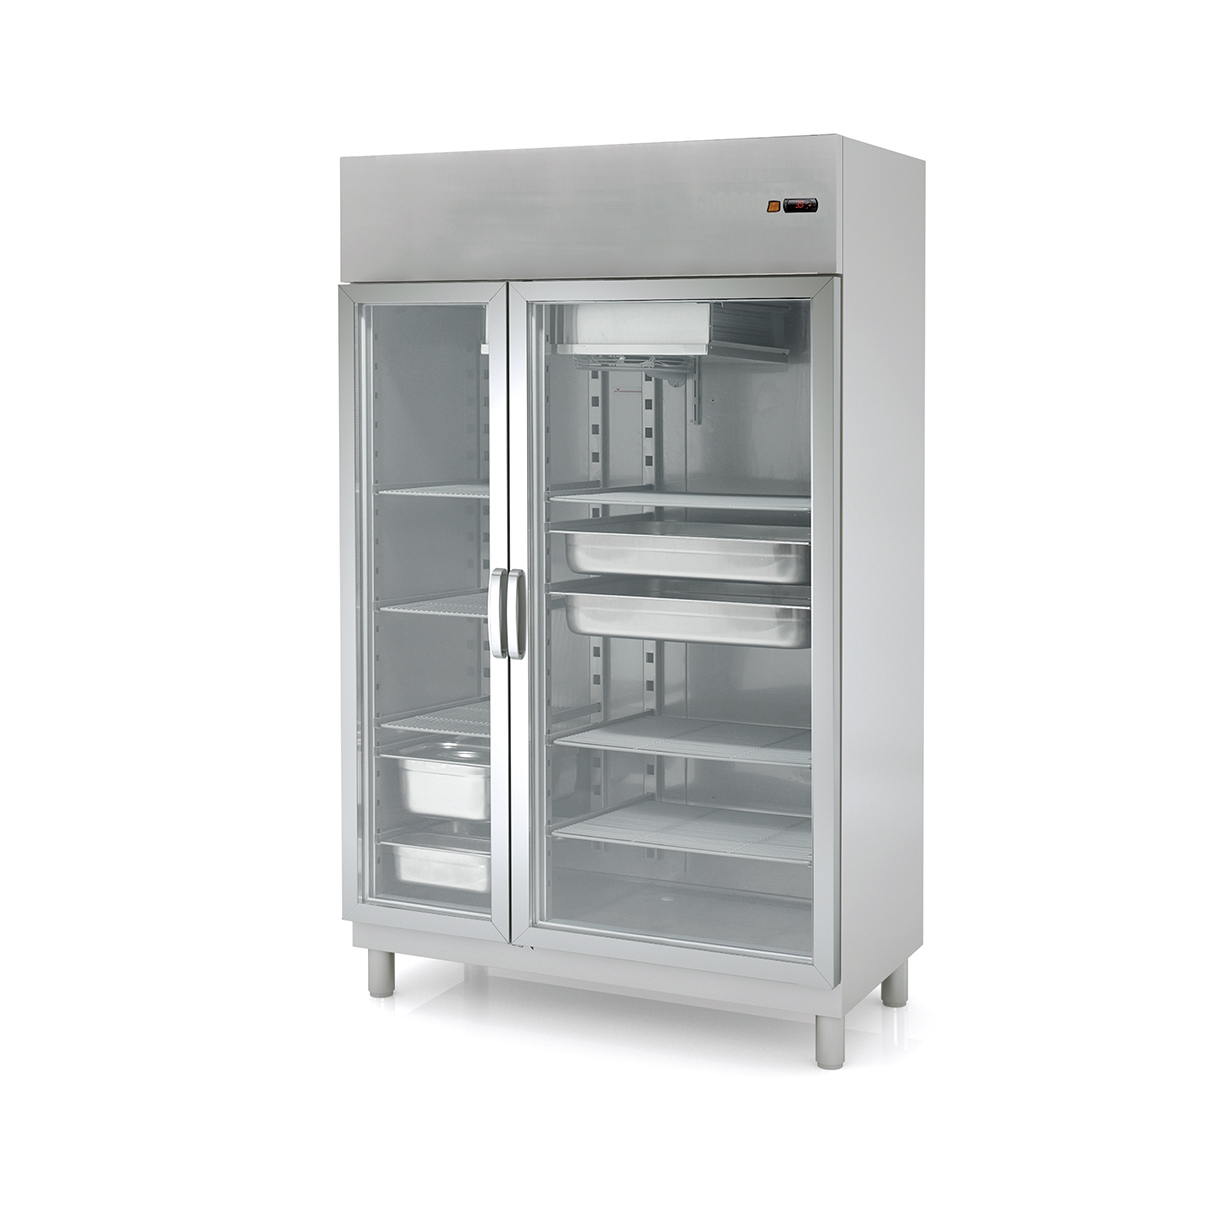 GASTRONORM Refrigerated Cabinet AGVD-125